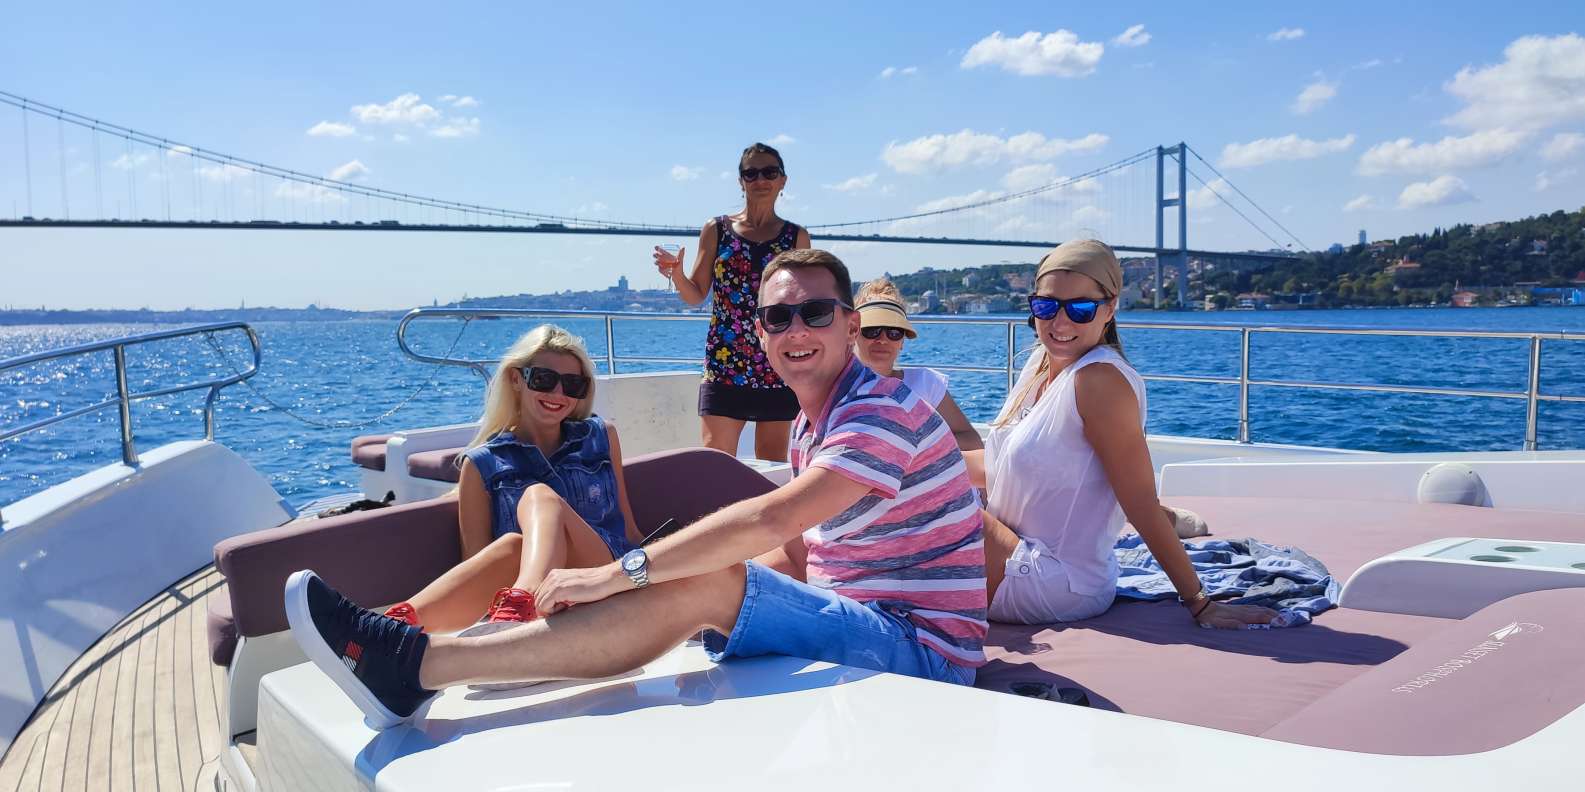 Istanbul’s Famous Waterway Tour

+ 2023